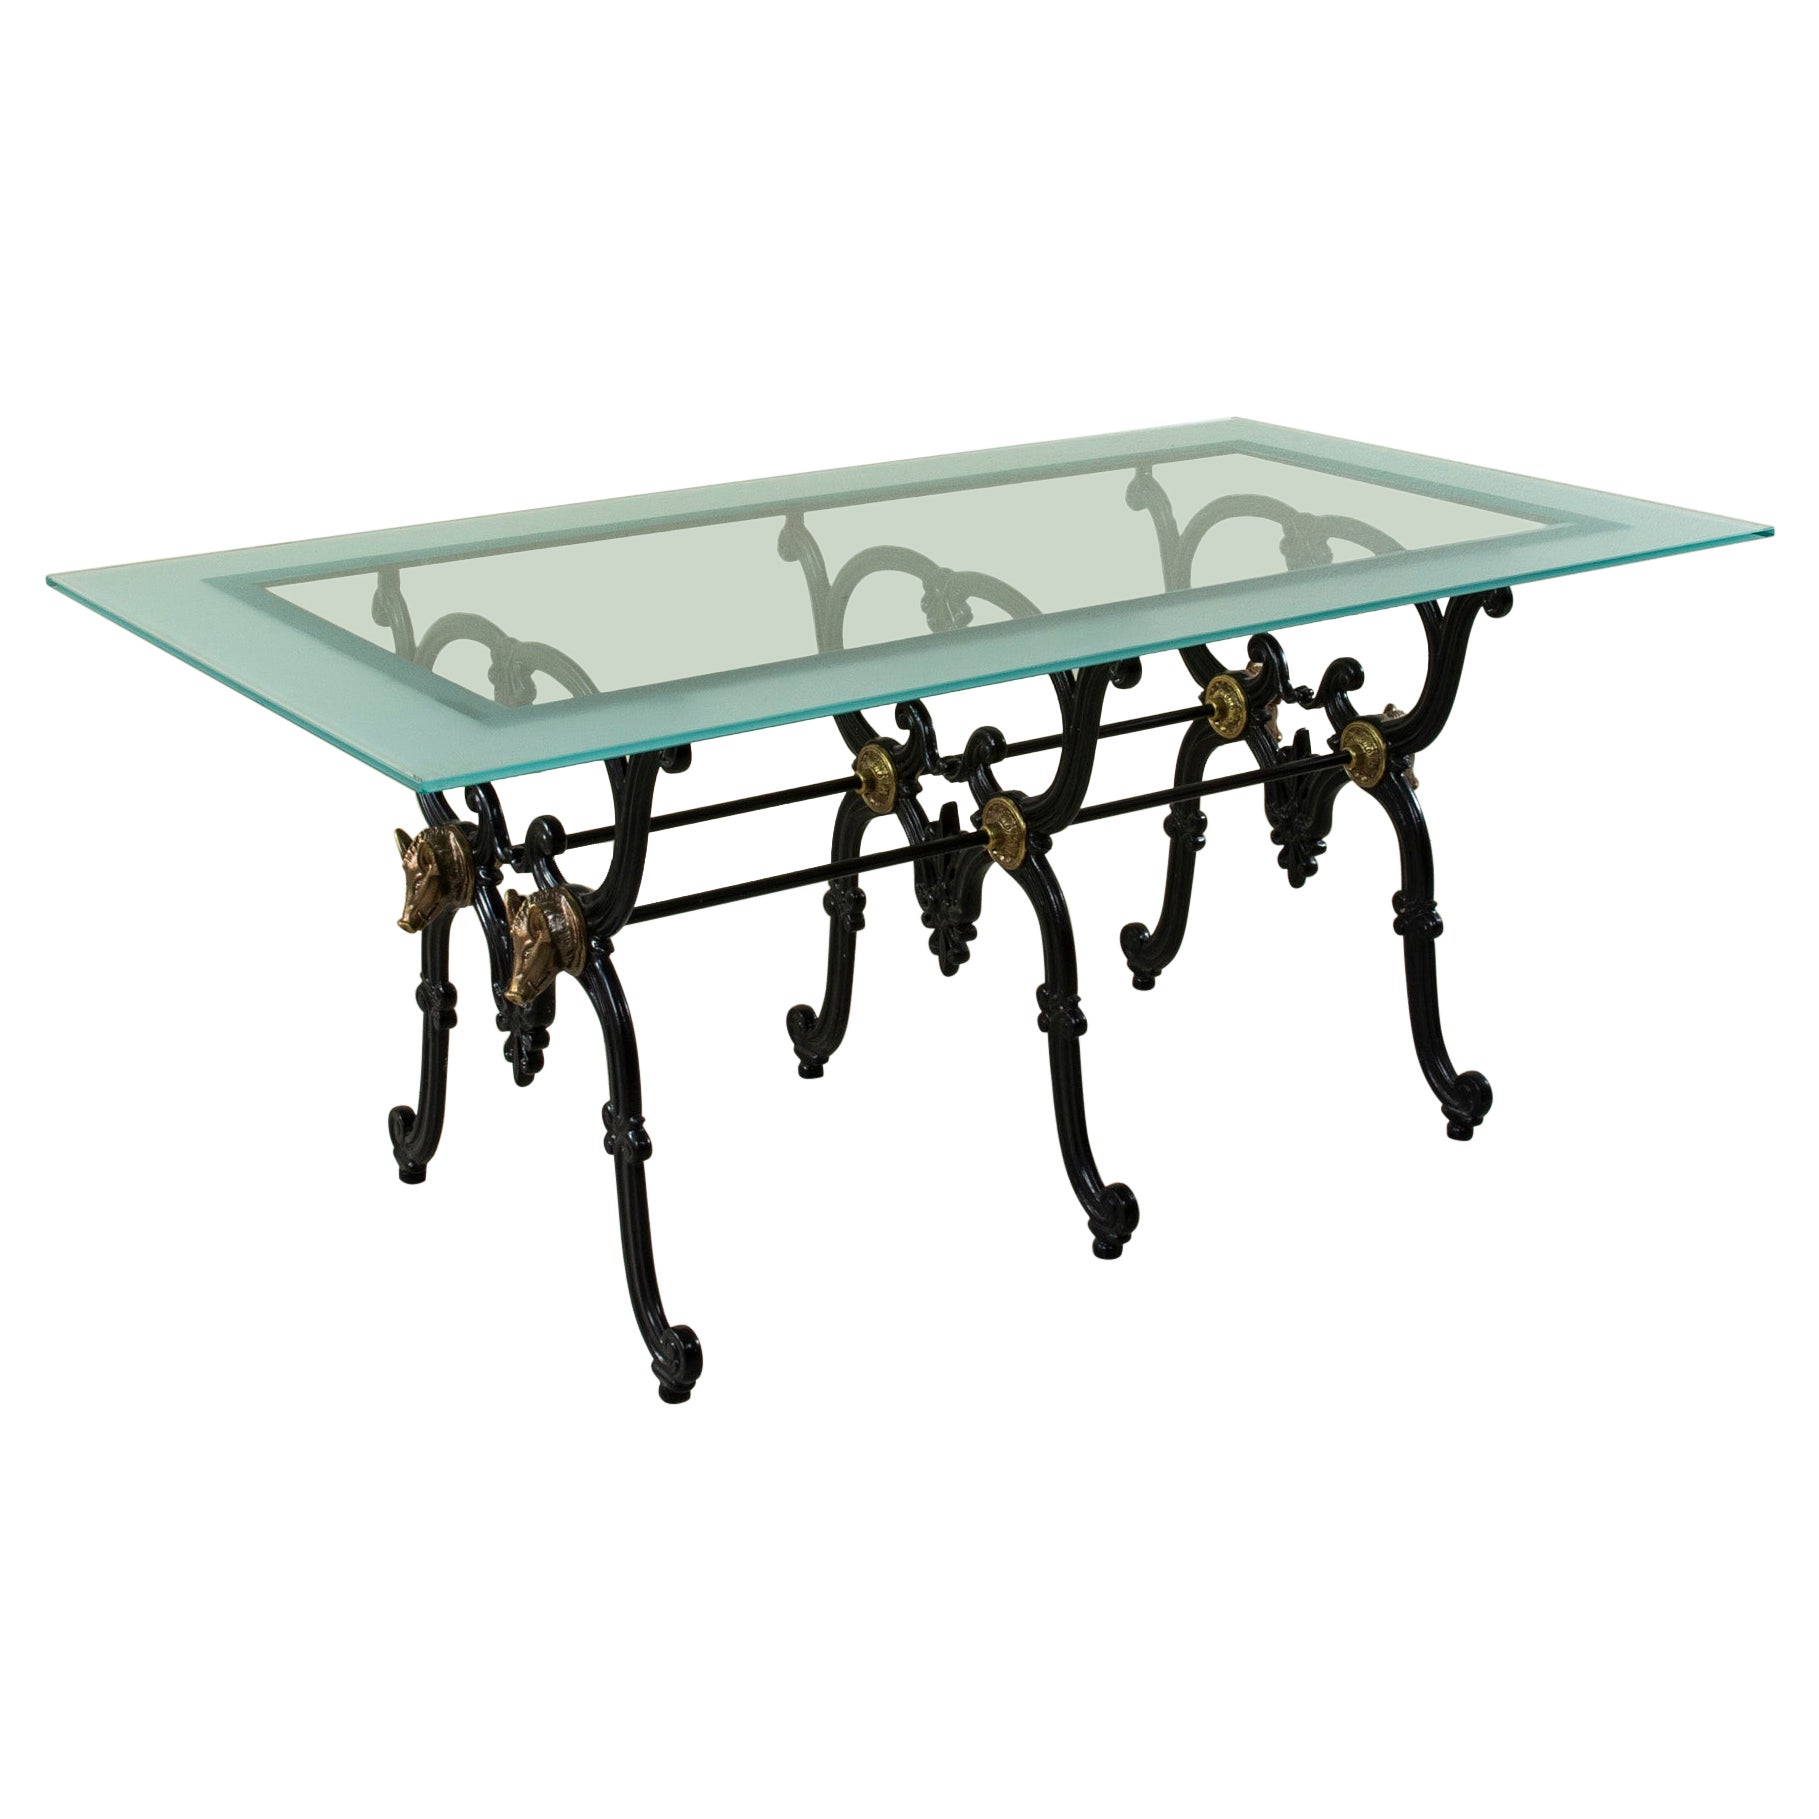 Early 20th Century French Iron and Glass Dining Table with Wild Boars For Sale